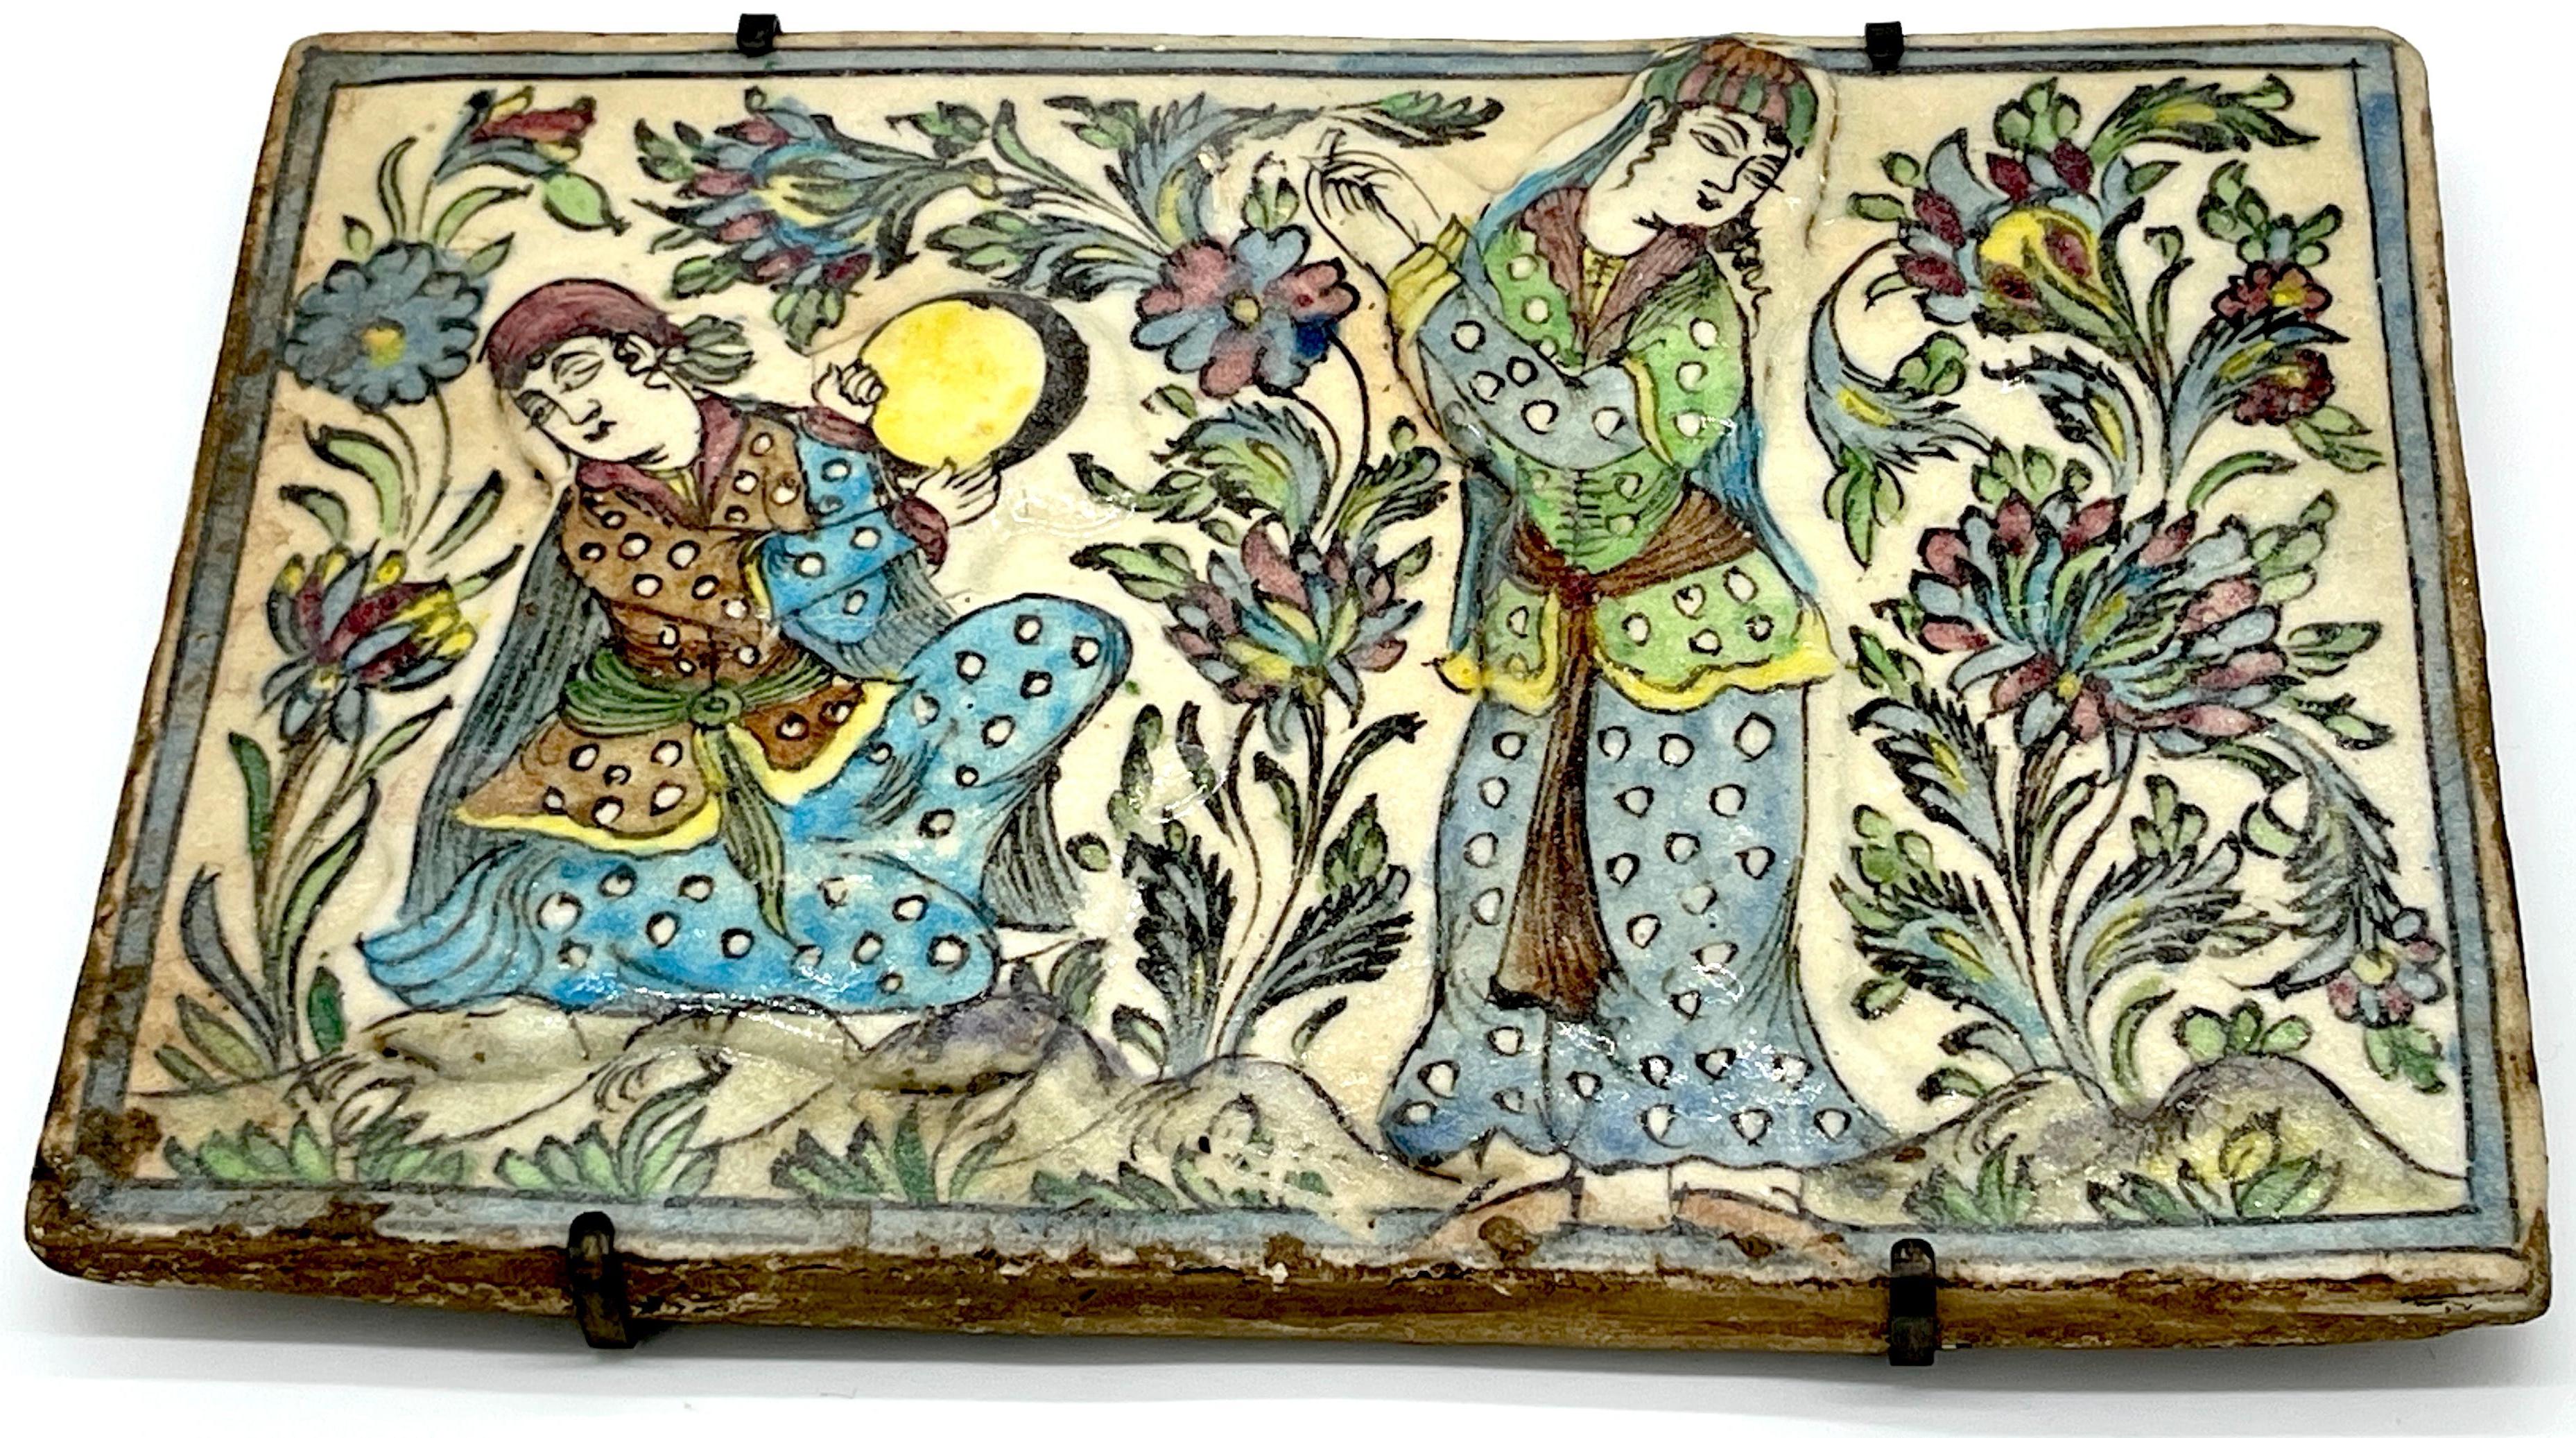 Large 19th-century Iznik pottery pictorial tile 'Maidens in Garden'
Asia, a 19th-century or older example 

A captivating large example from the 19th century, this Iznik pottery pictorial tile titled 'Maidens in Garden' from Asia, Measuring 14.5